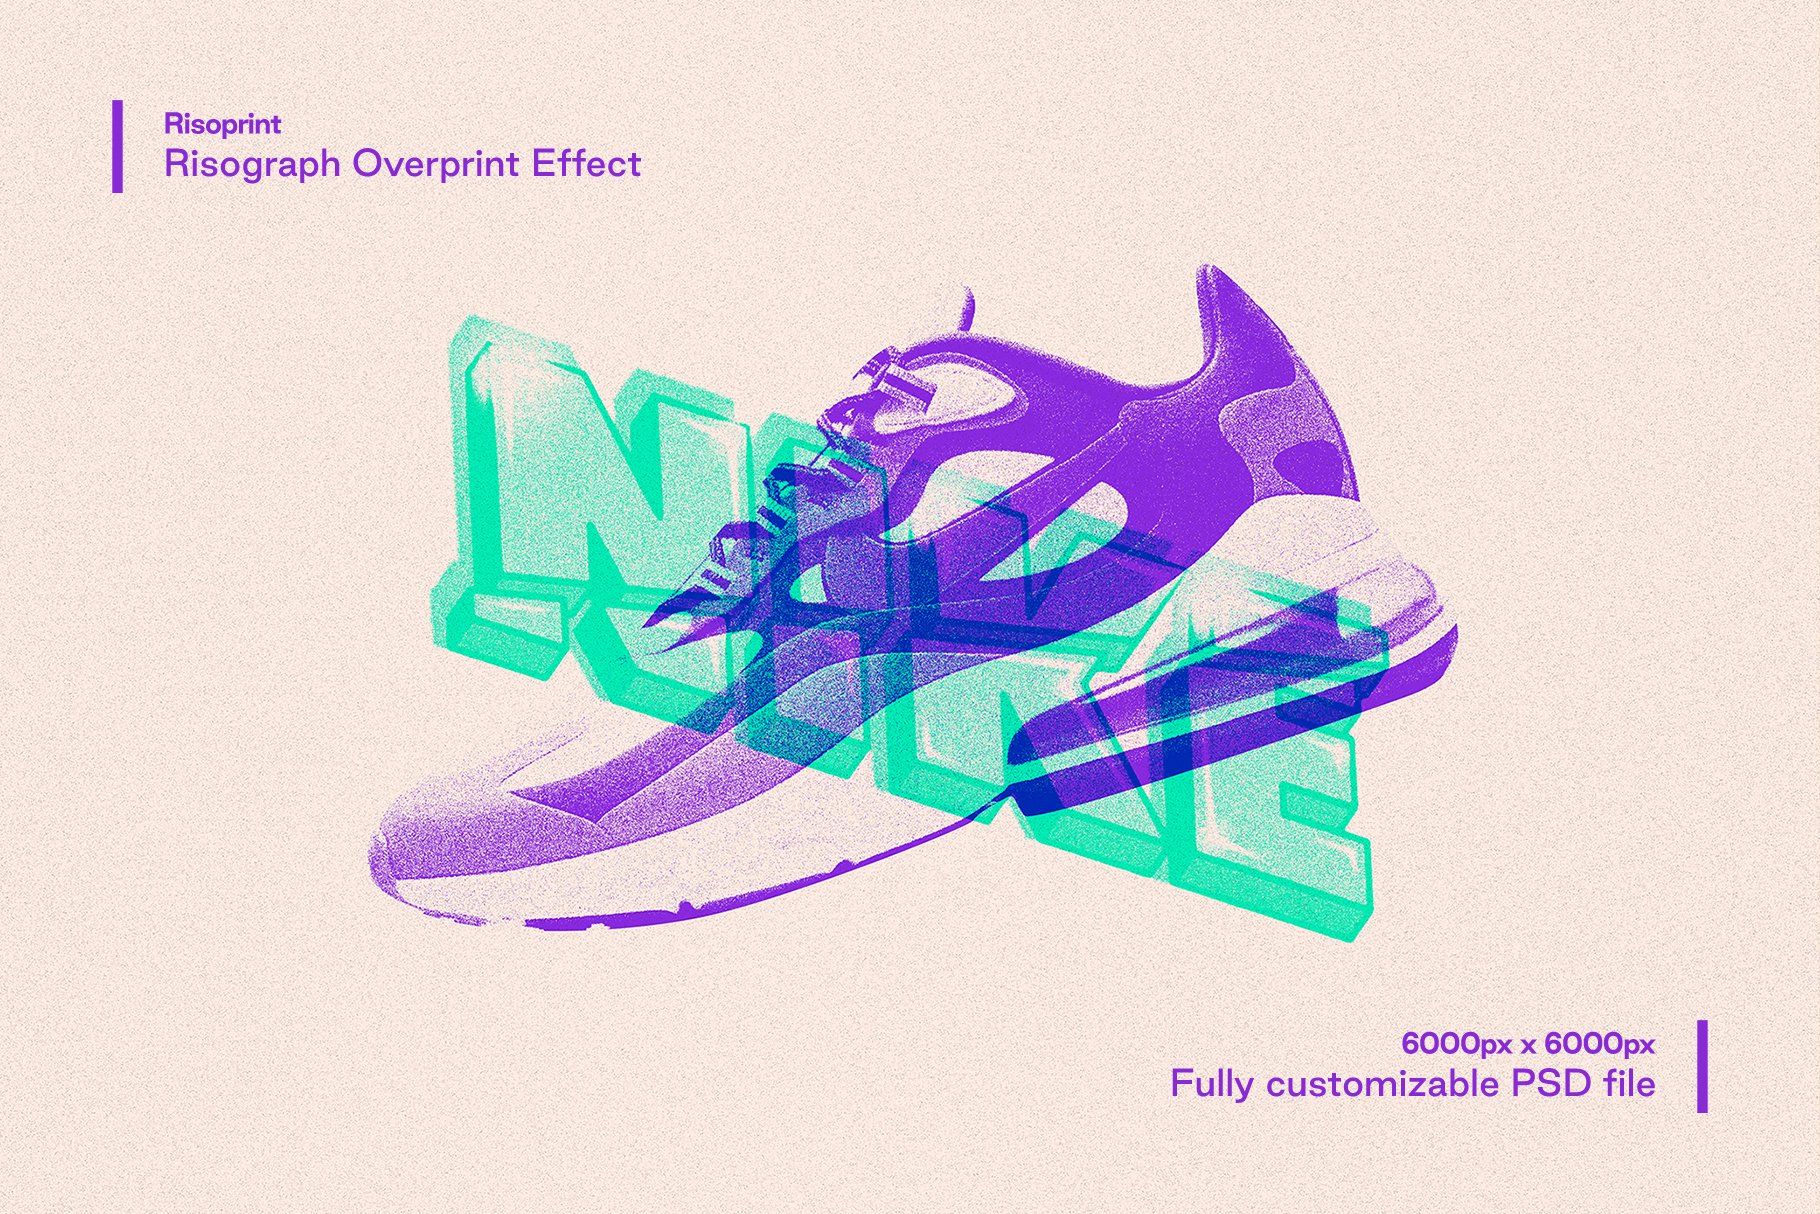 Cool choose for ad - neon boots on a logo.